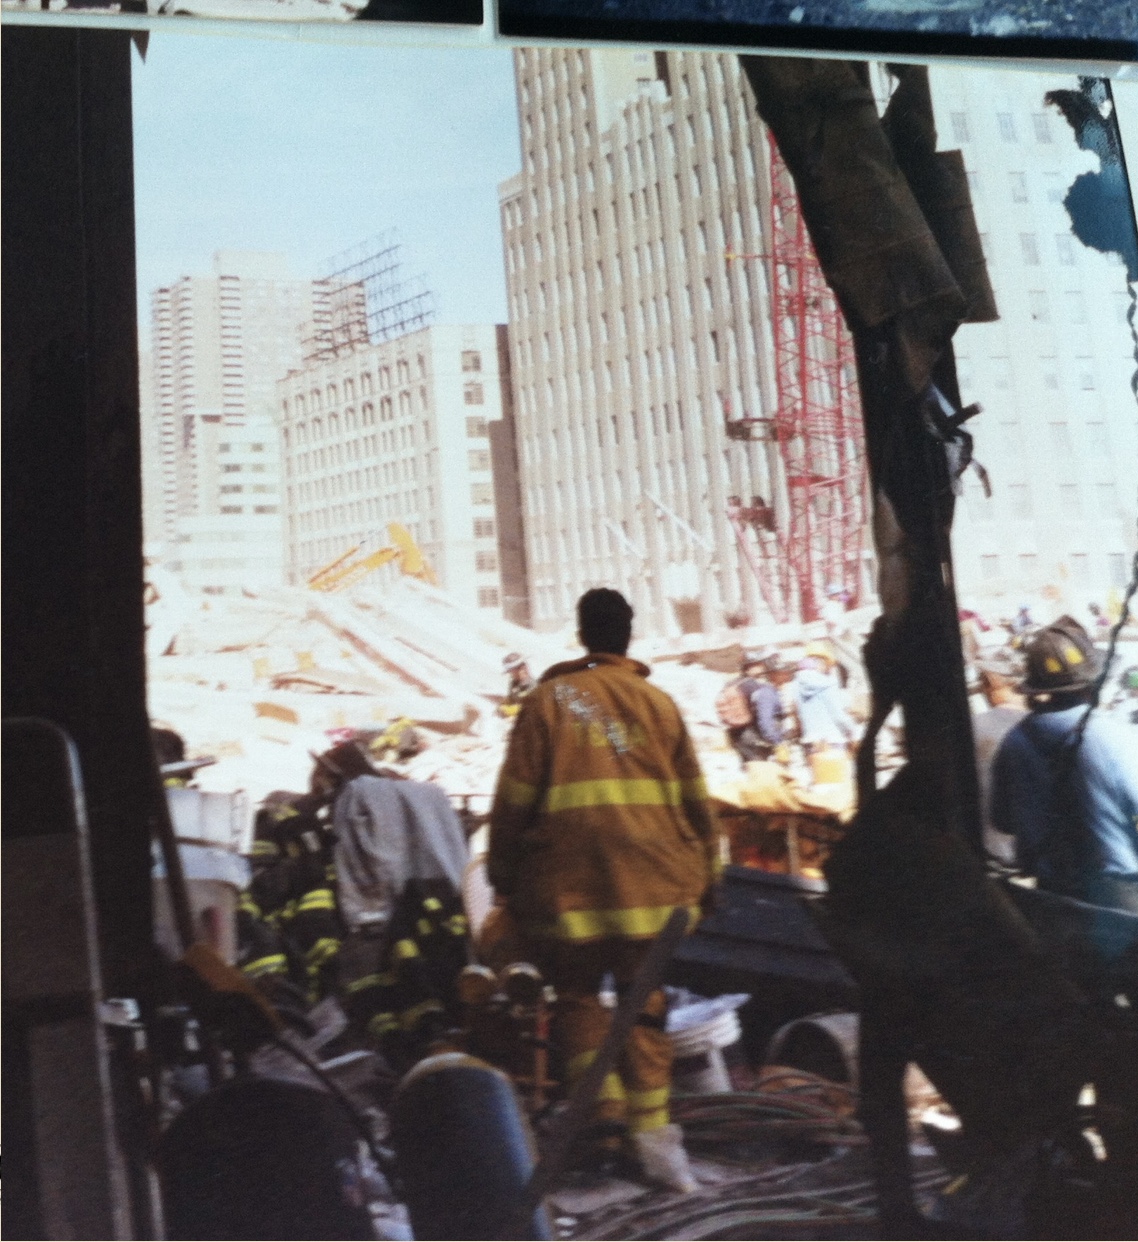 A firefighter stands beside the rubble at Ground Zero